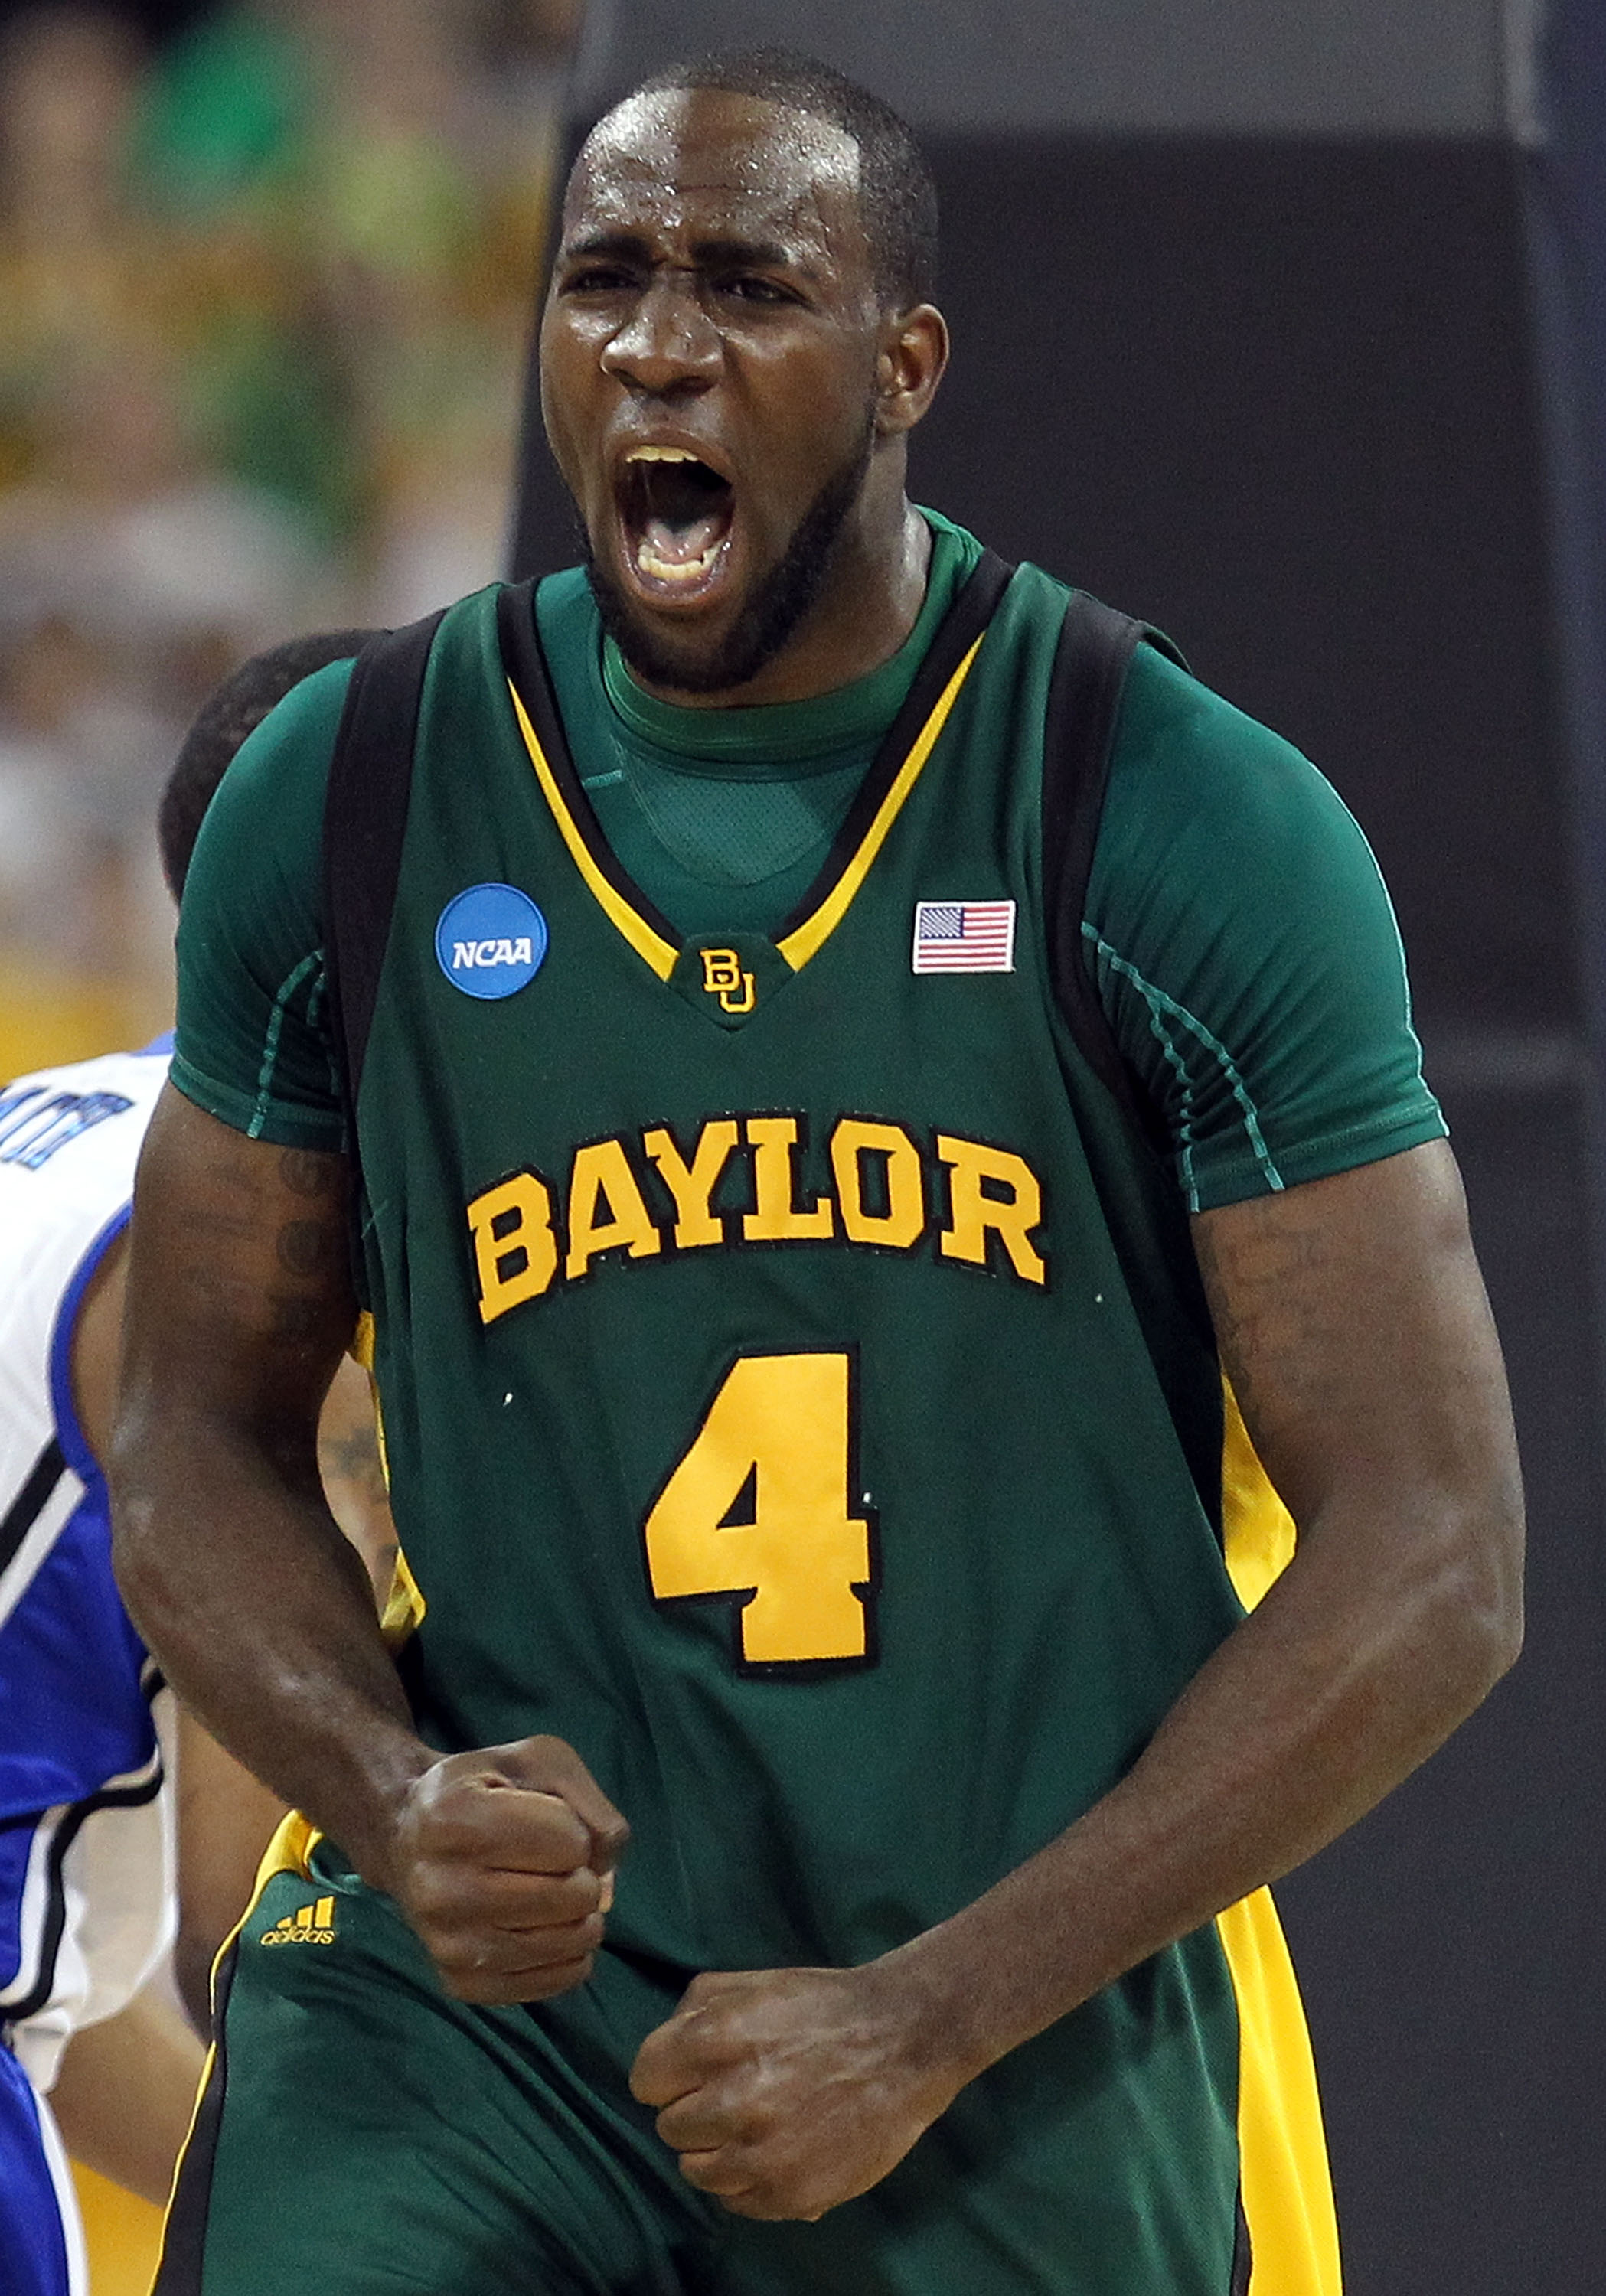 HOUSTON - MARCH 28:  Forward Quincy Acy #4 of the Baylor Bears reacts after making a slam dunk against the Duke Blue Devils during the south regional final of the 2010 NCAA men's basketball tournament at Reliant Stadium on March 28, 2010 in Houston, Texas